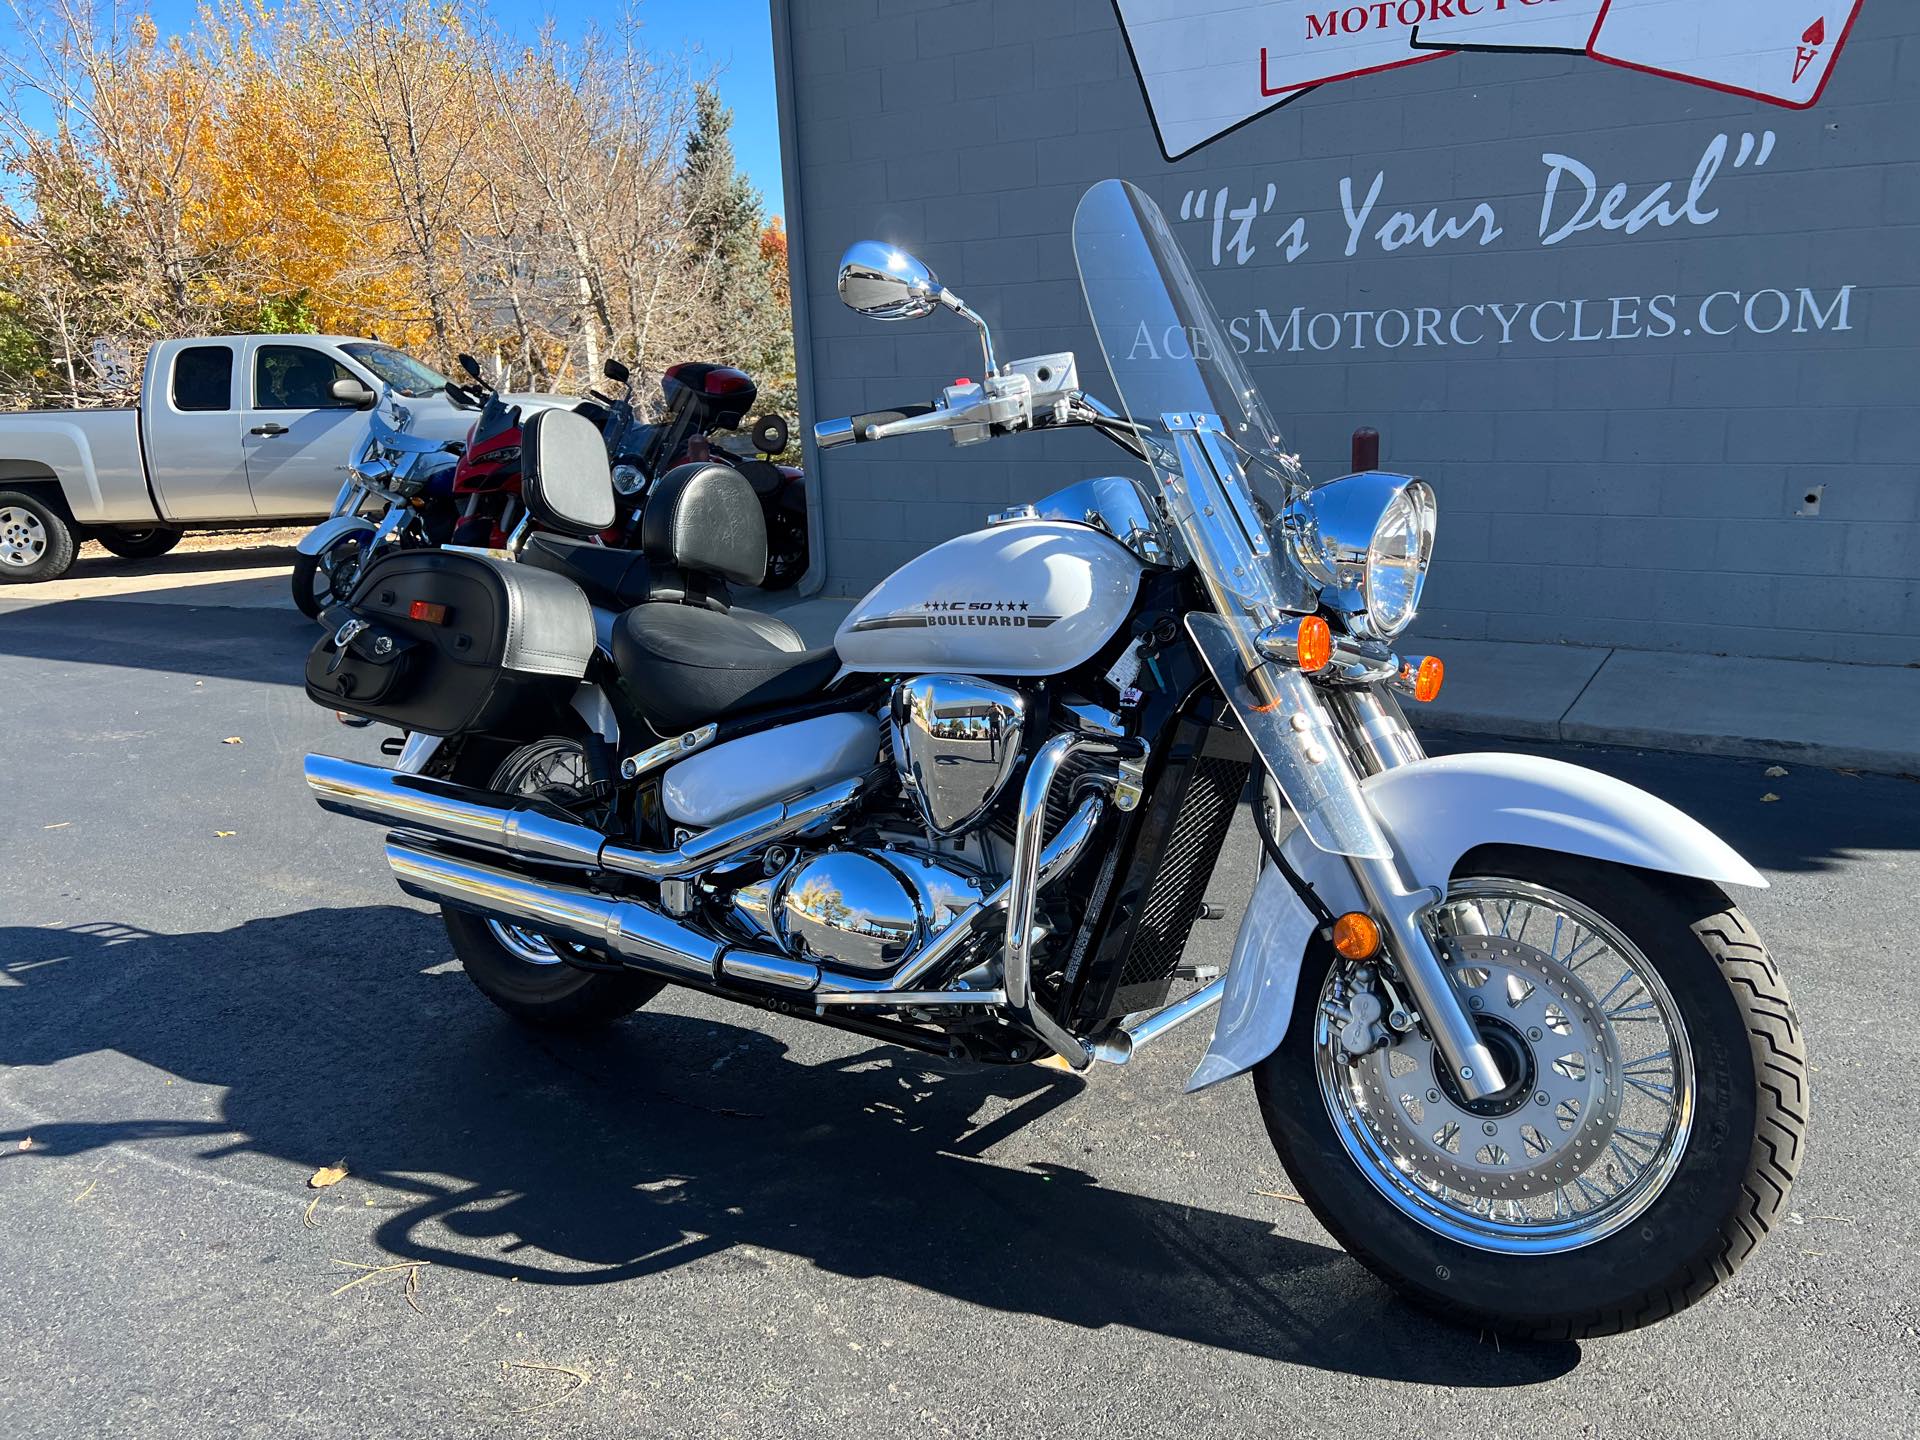 2017 Suzuki Boulevard C50 at Aces Motorcycles - Fort Collins